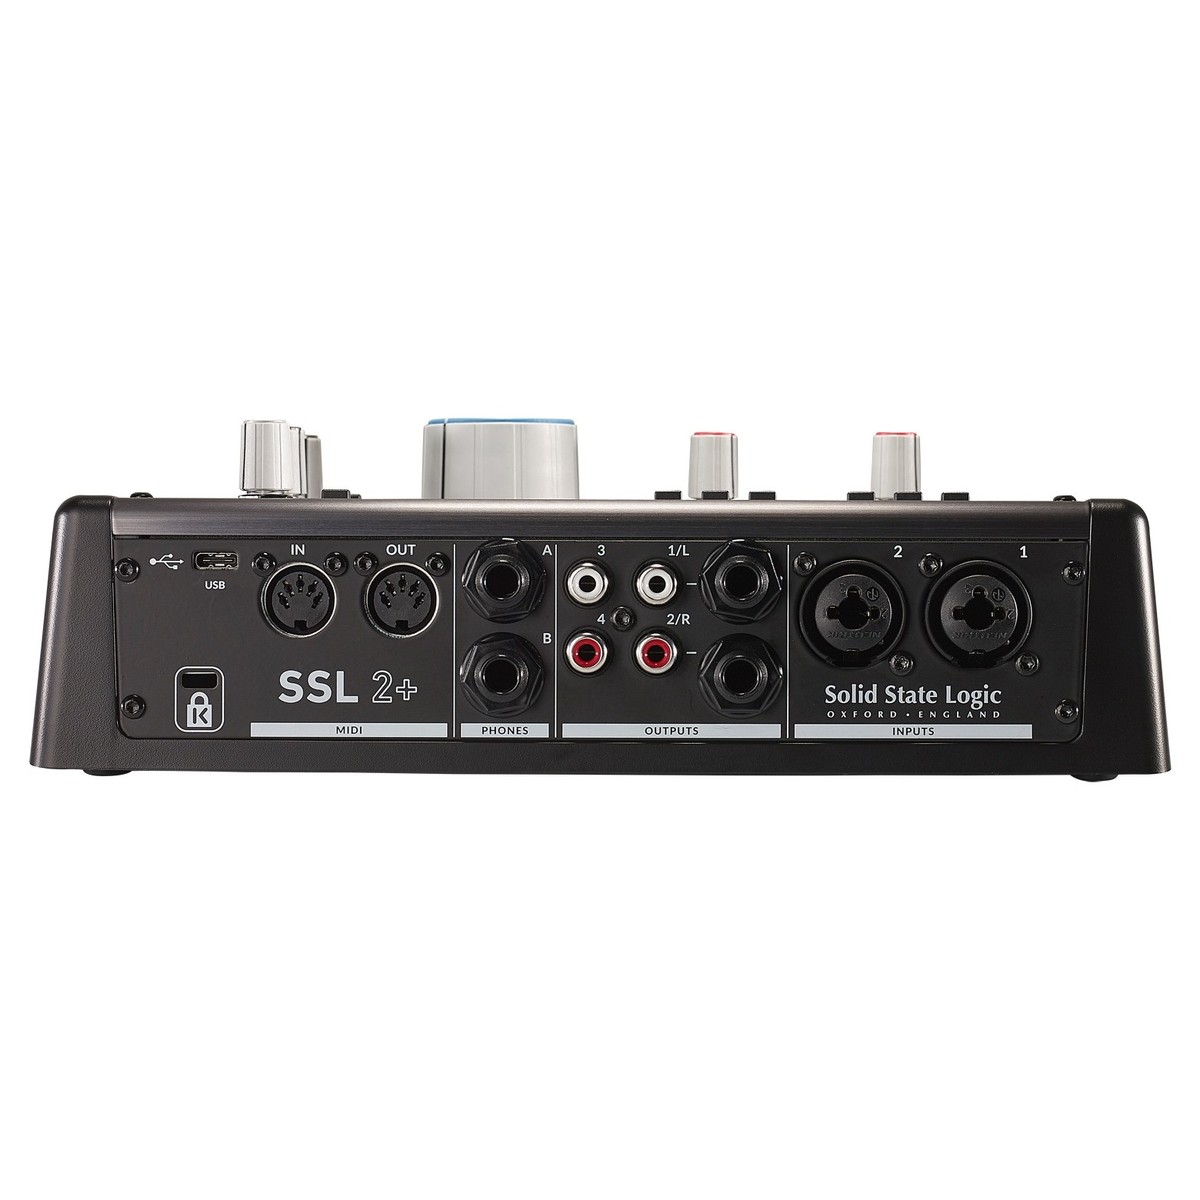 SOLID STATE LOGIC SSL2+ AUDIO INTERFACE INTERFACCIA AUDIO 2 IN 4 OUT 1